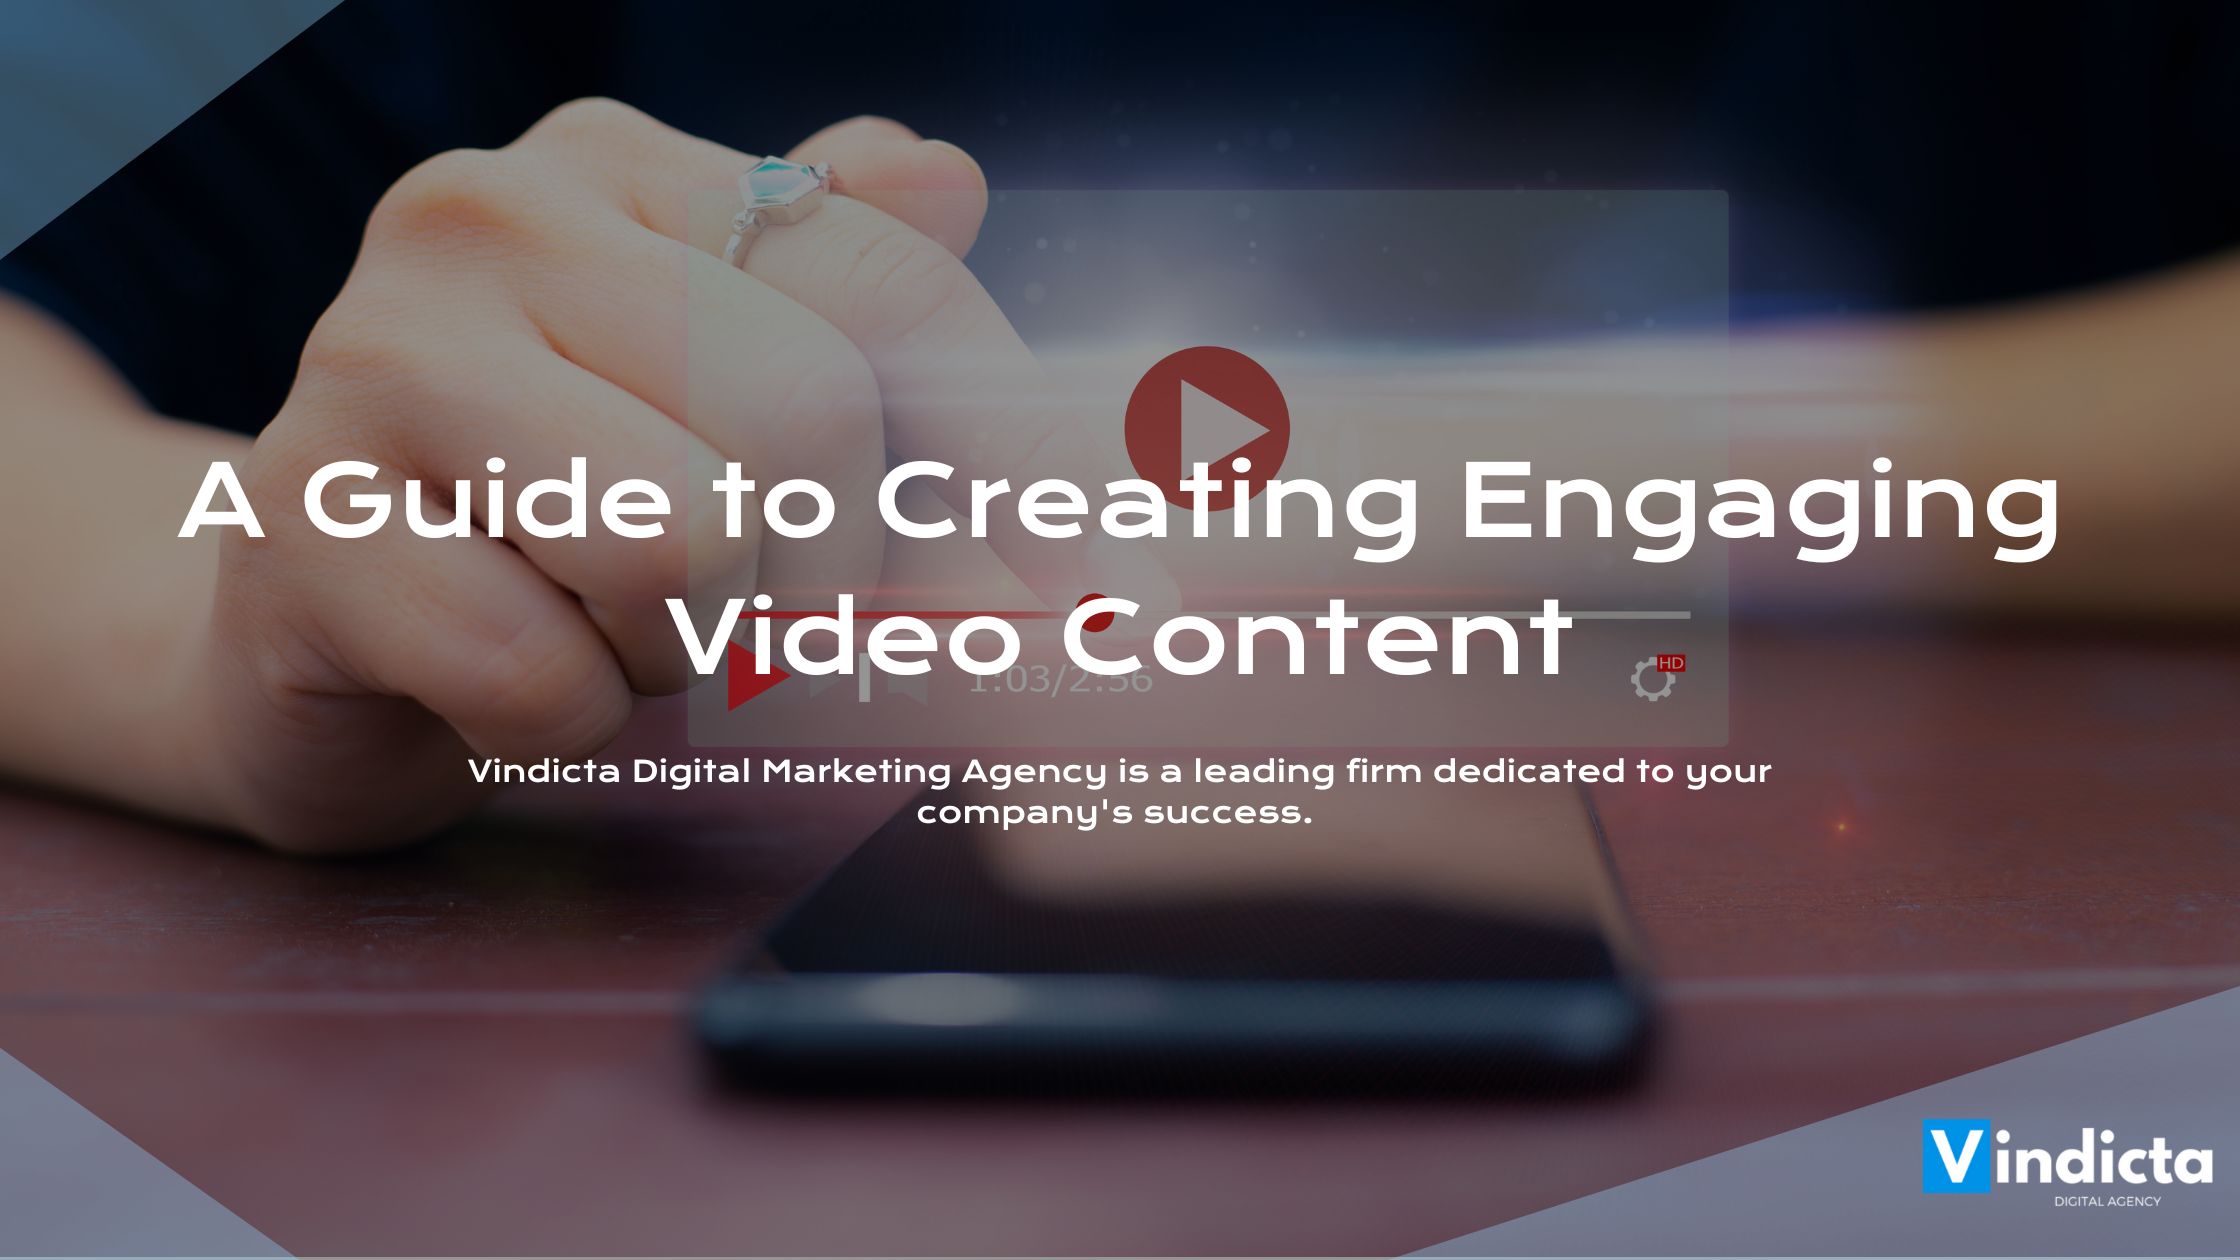 A Step-by-Step Guide to Creating Engaging Video Content